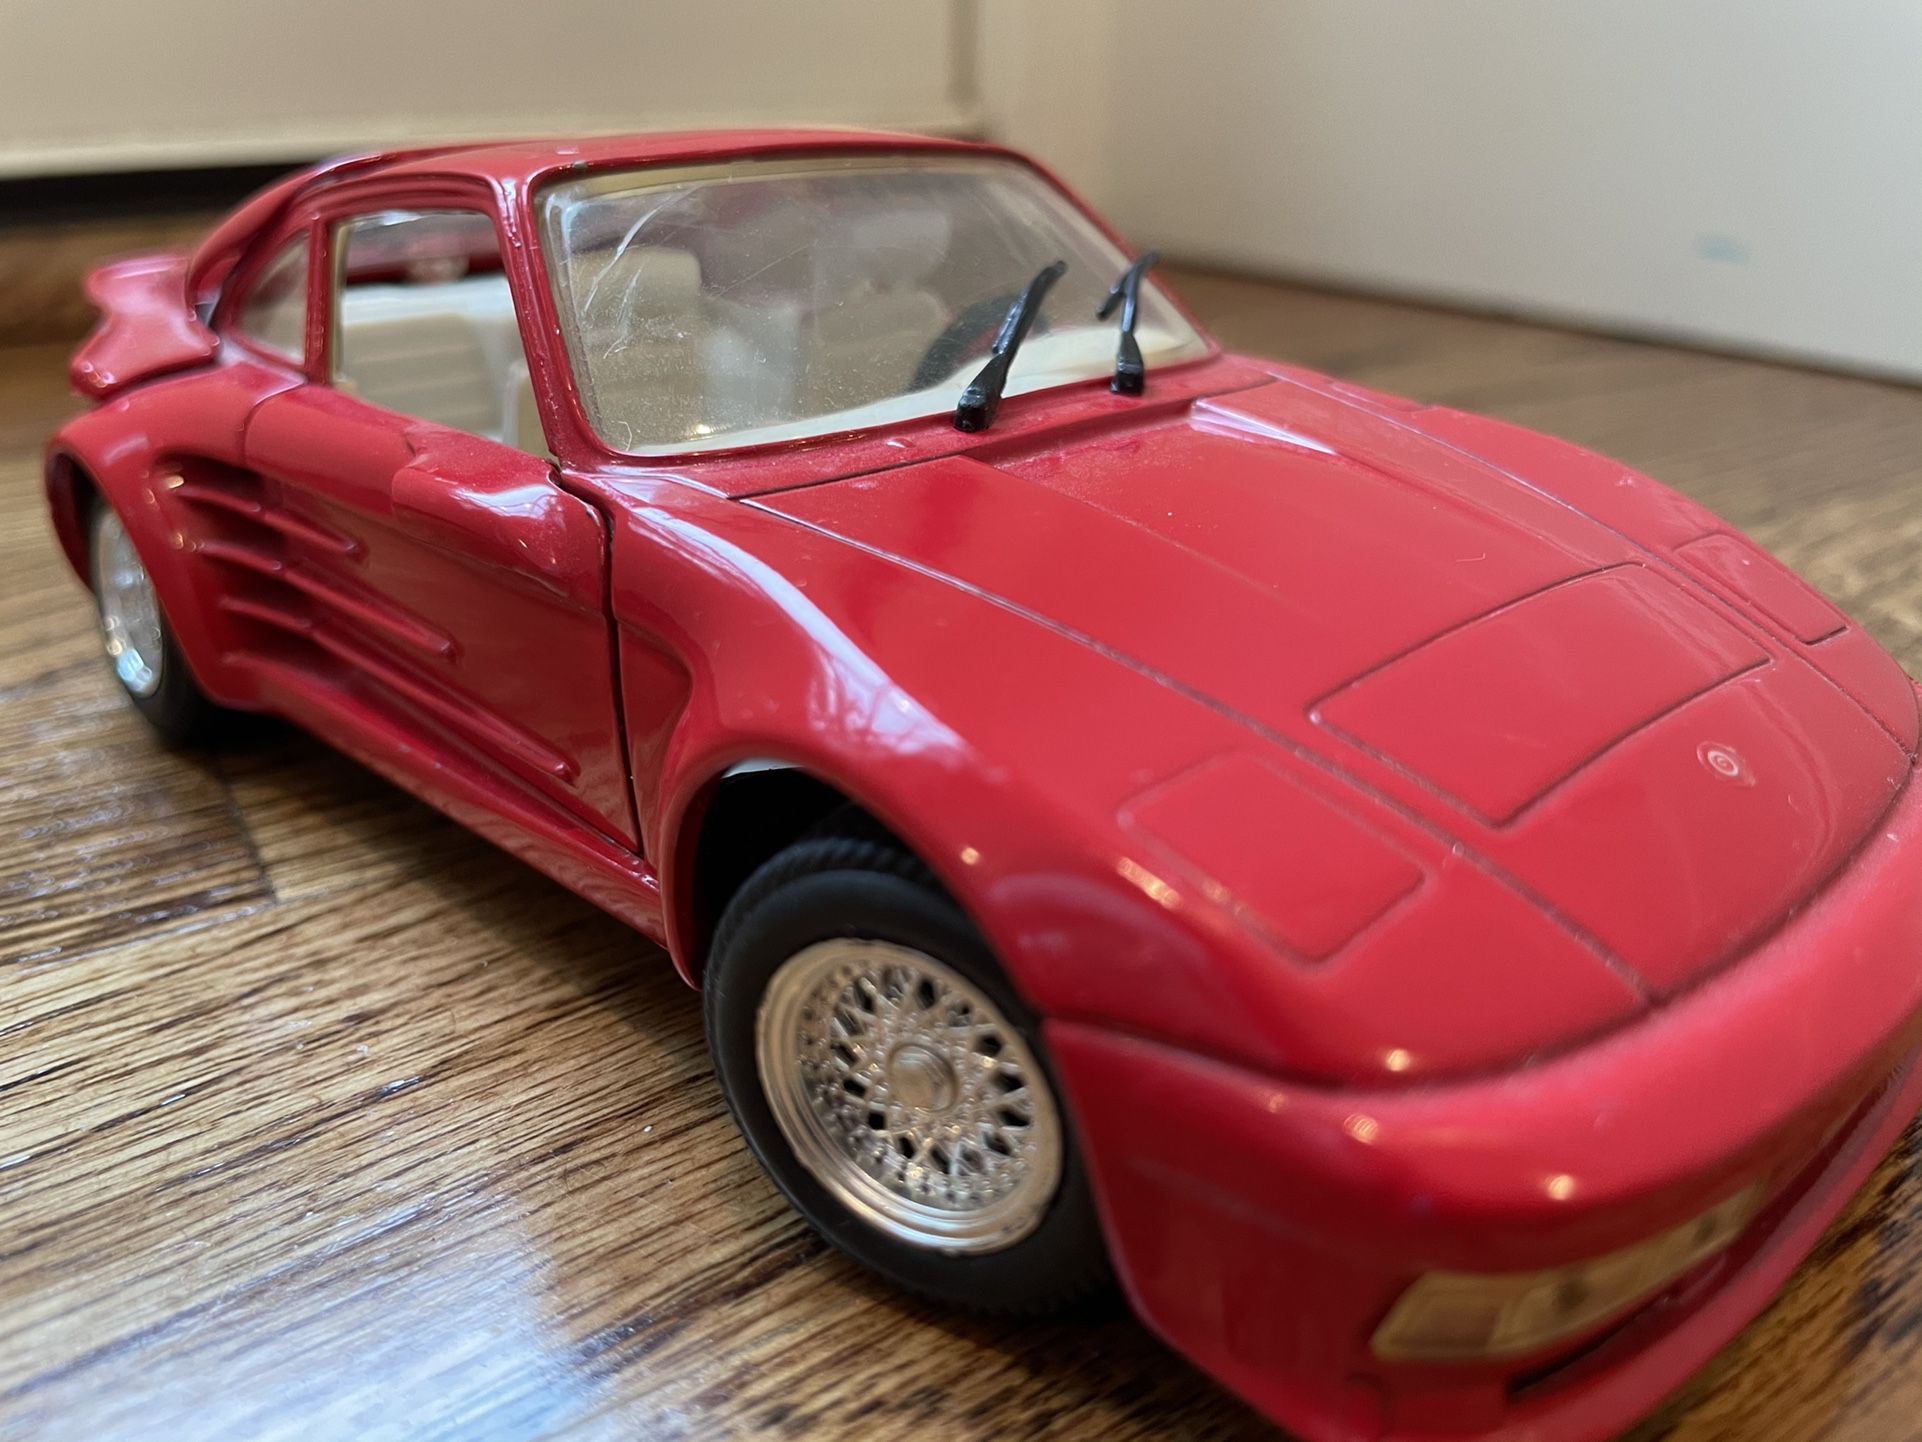 Revell 1:24 Porsche Turbo Gemballa Avalanche Cyrus 1990 Metal Toy Car Collectible Rare. Condition is pre owned shows some light signs of wear but and 